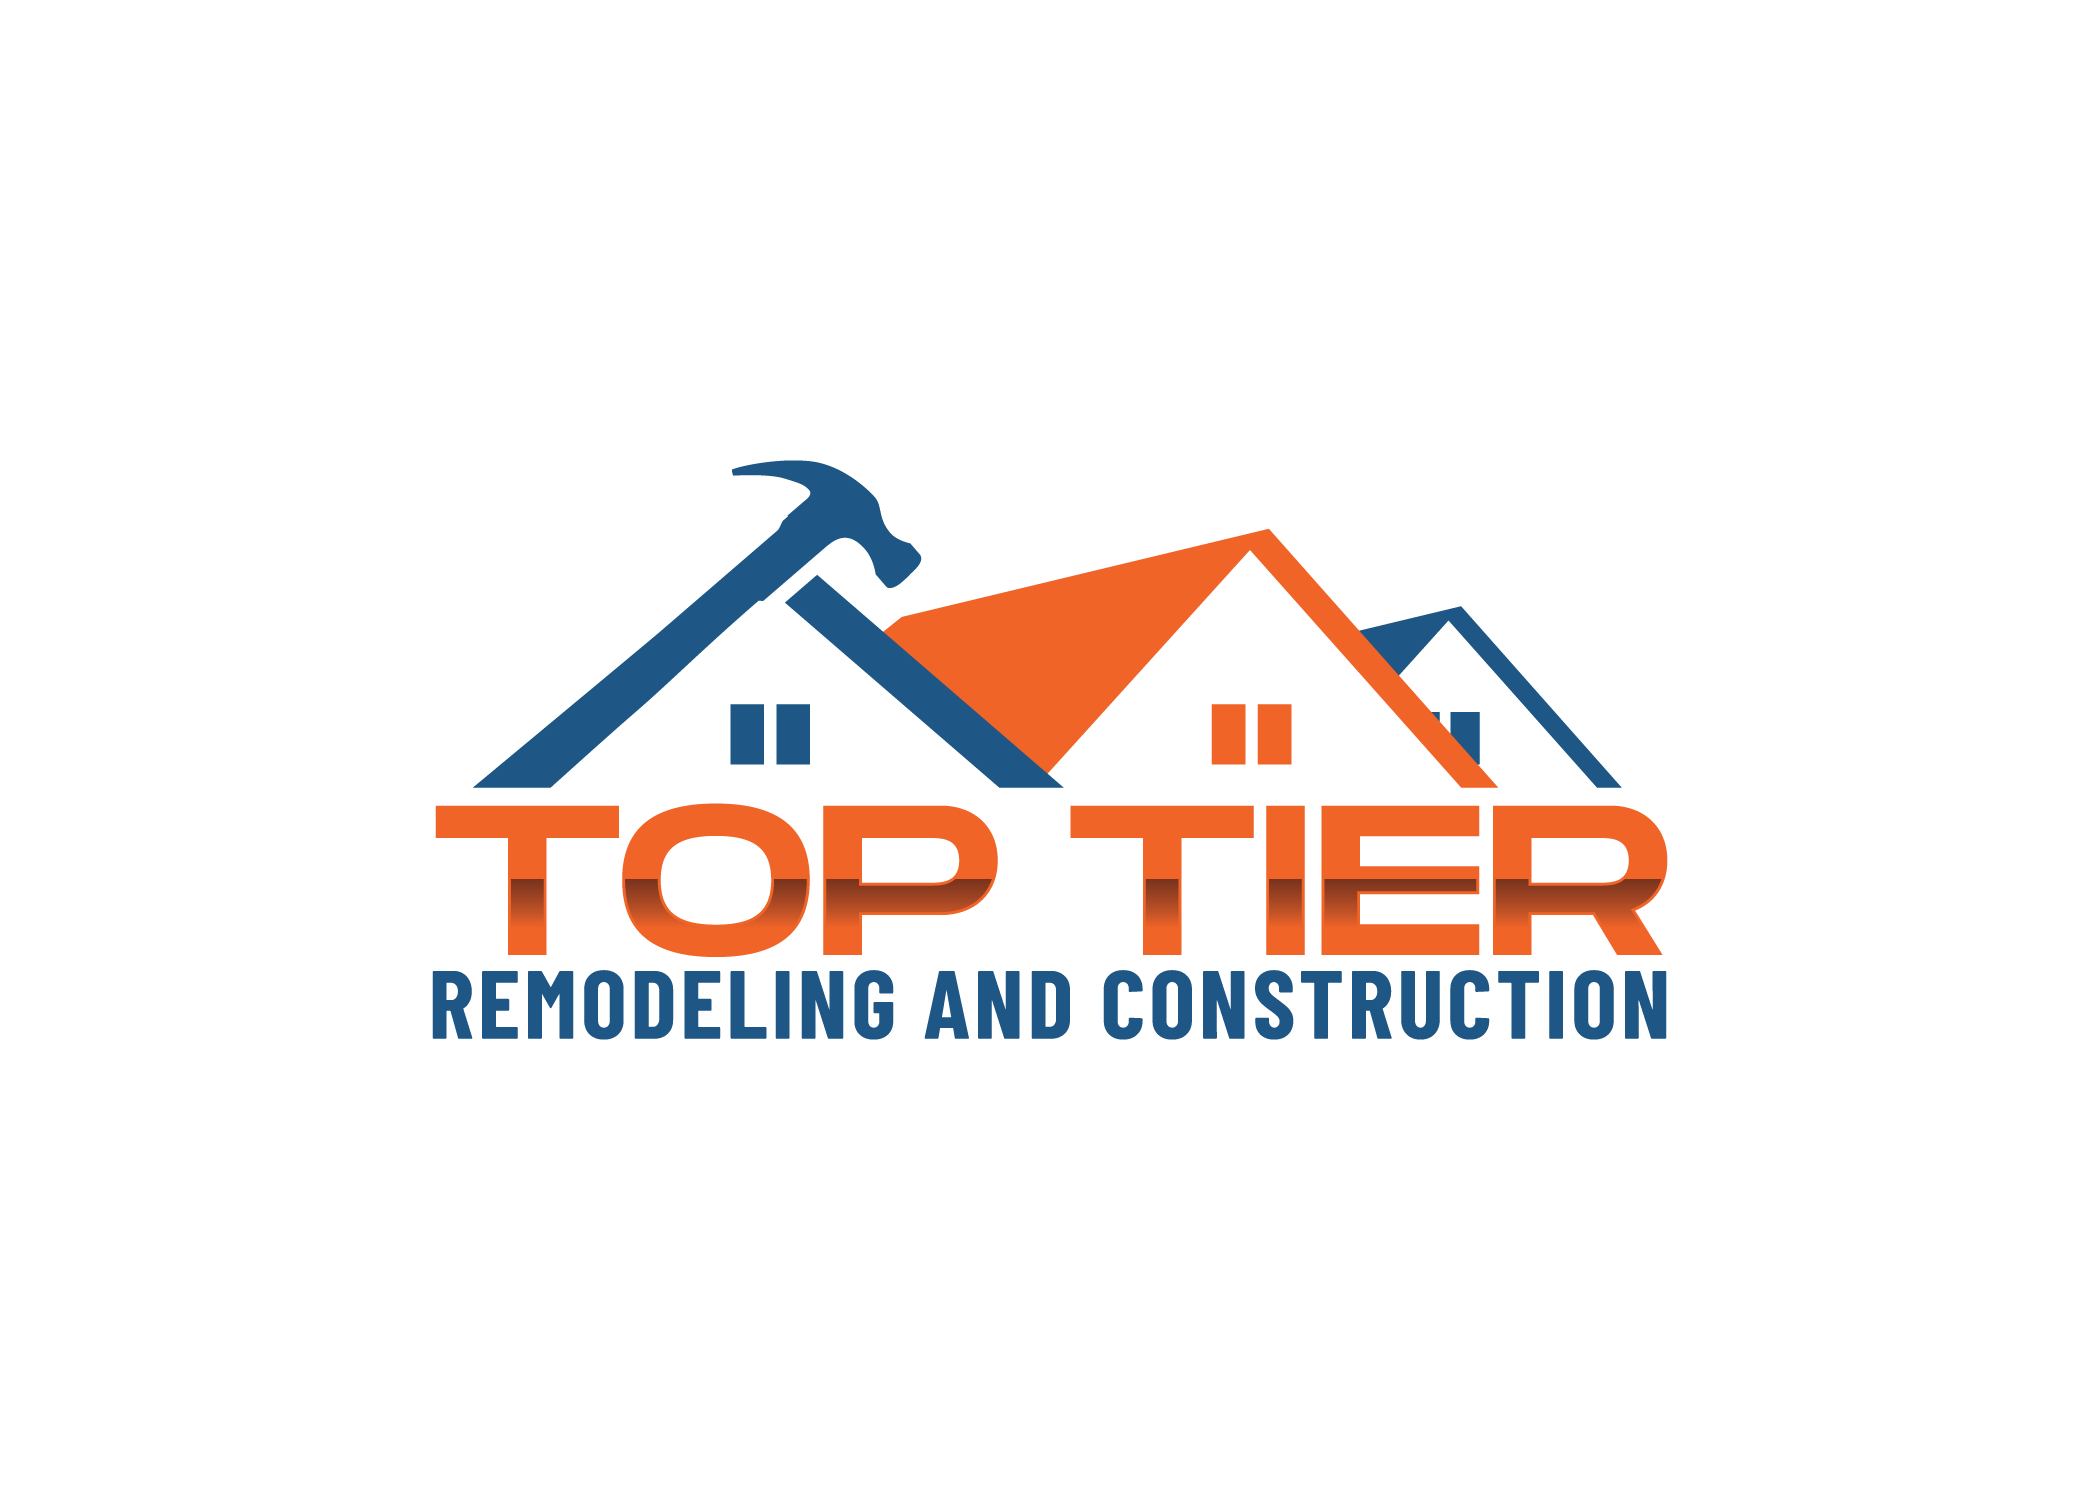 Top Tier Home Remodeling Inc. Has All The Qualities Of A Great Remodeling Contractor.